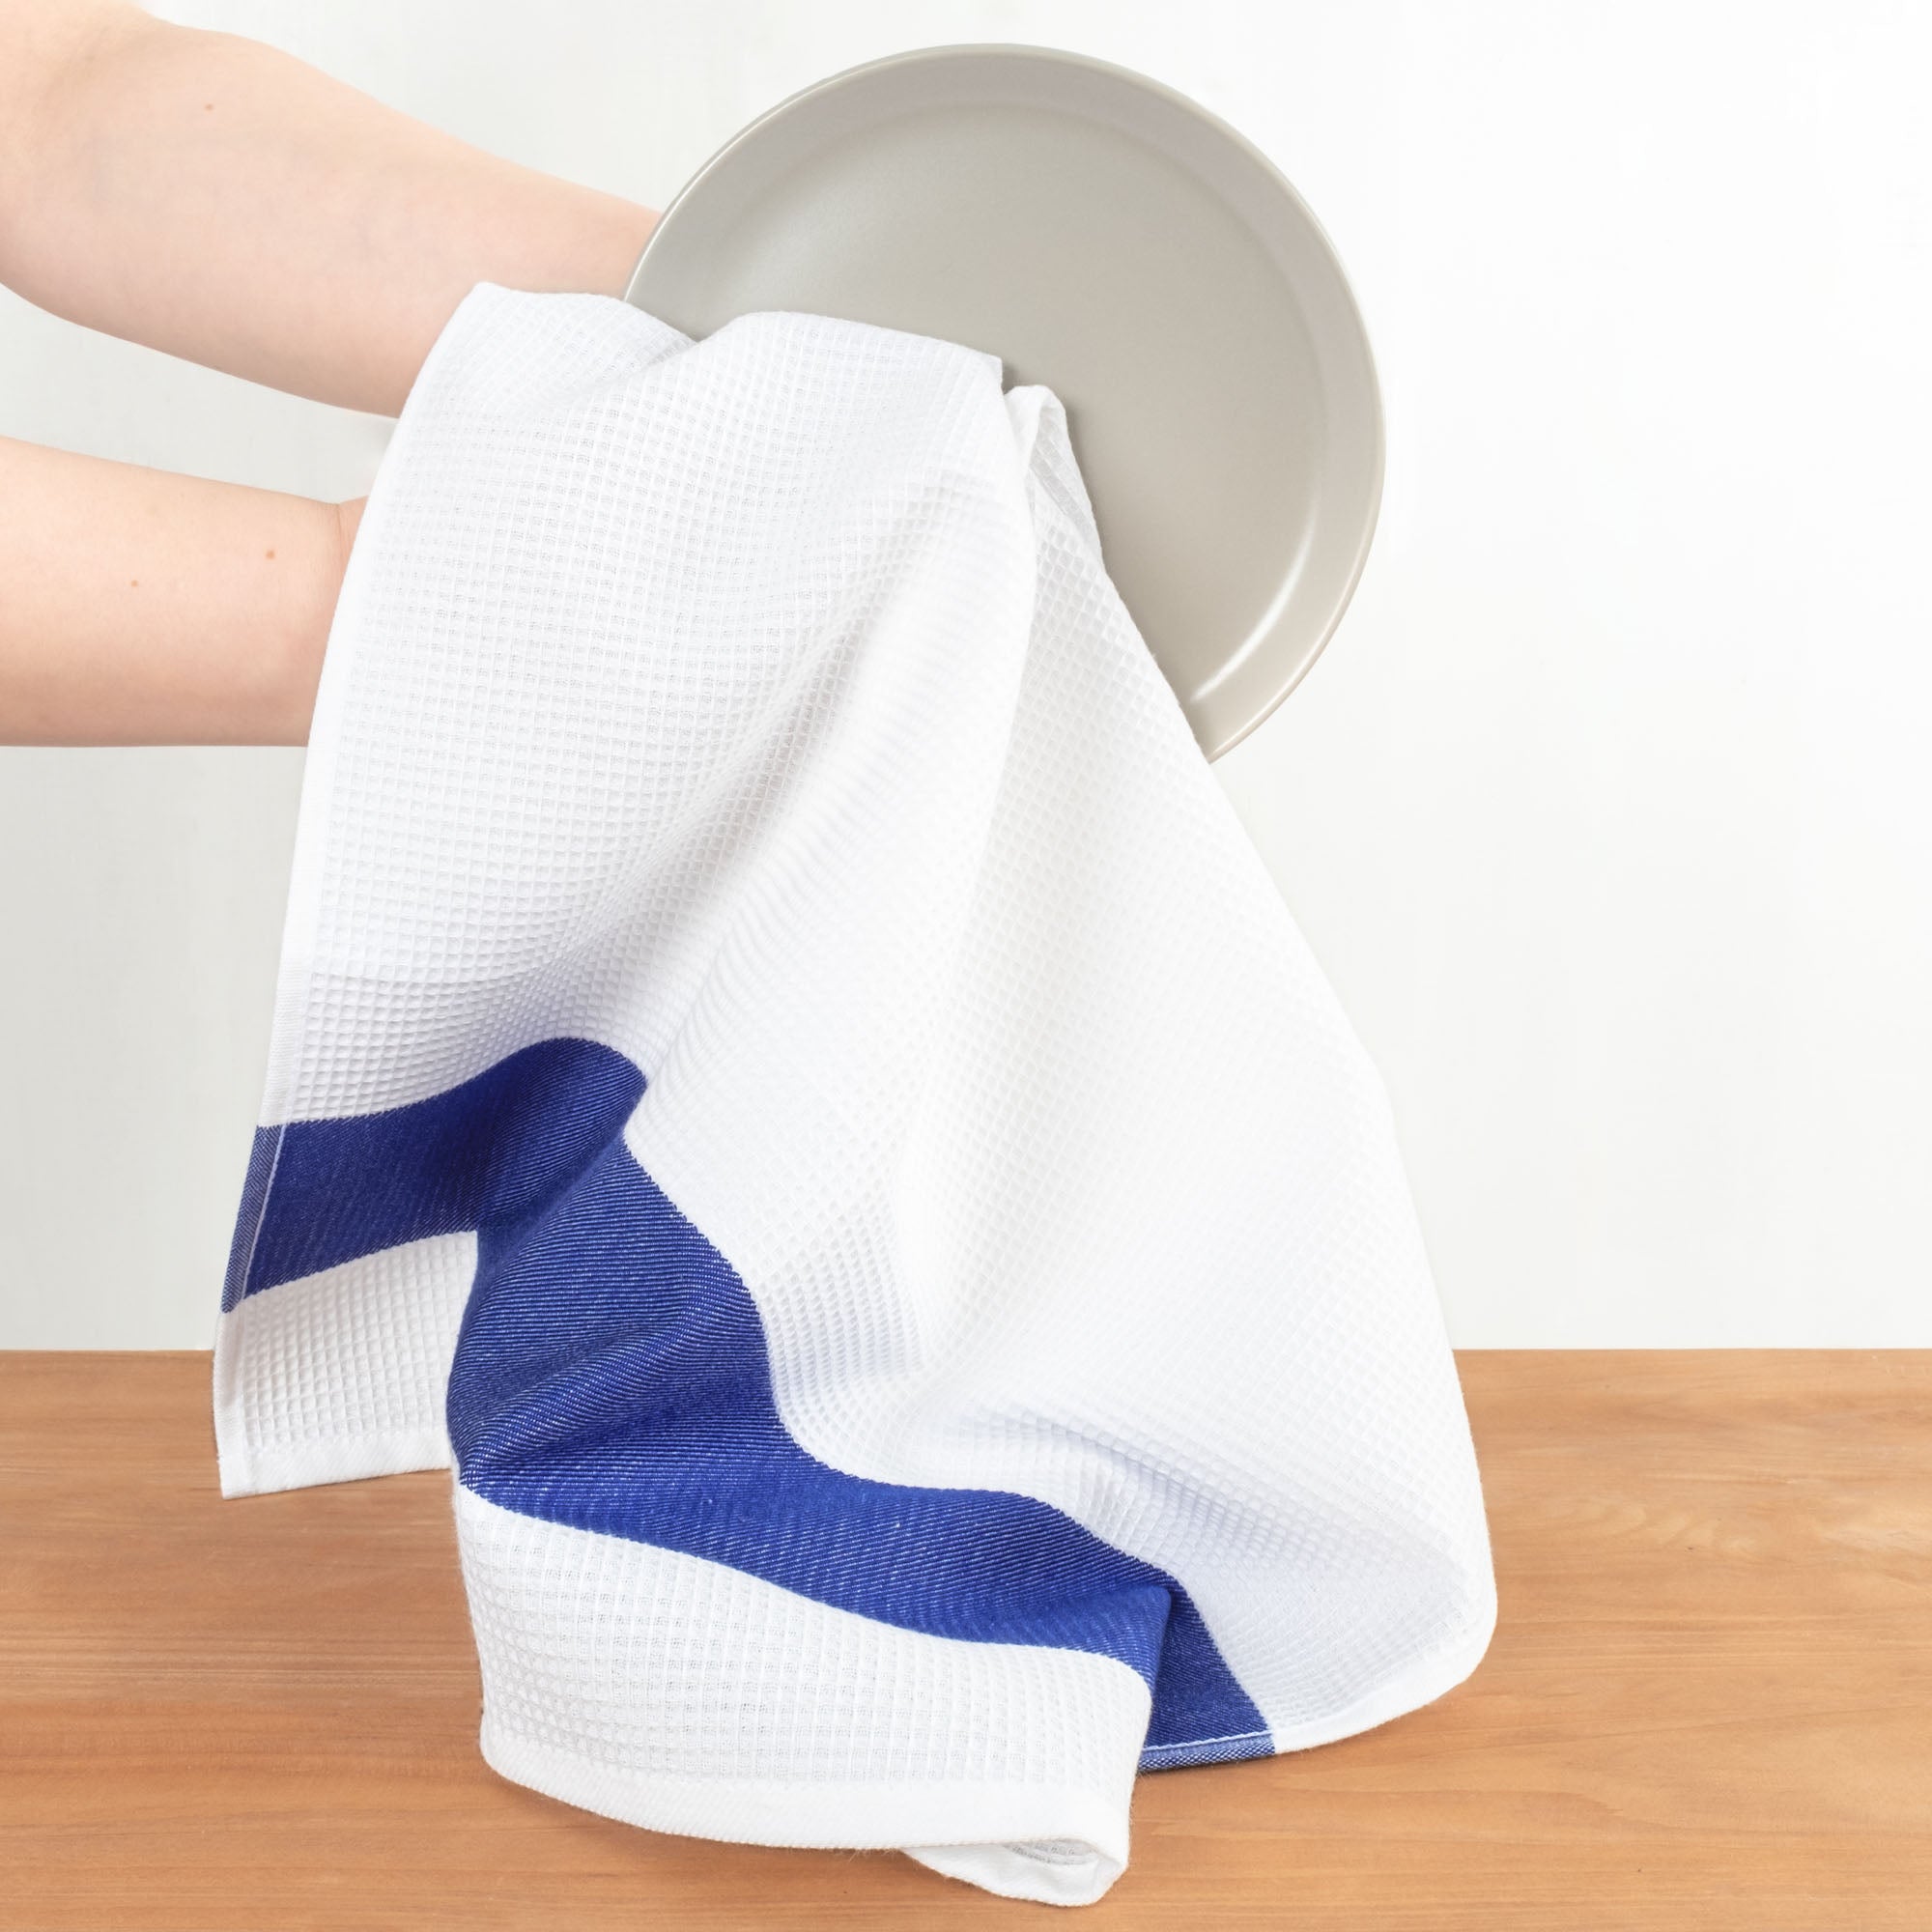 American Soft Linen 4 Packed Dish Towels, 100% Cotton Dish Cloths for Kitchen mix-2